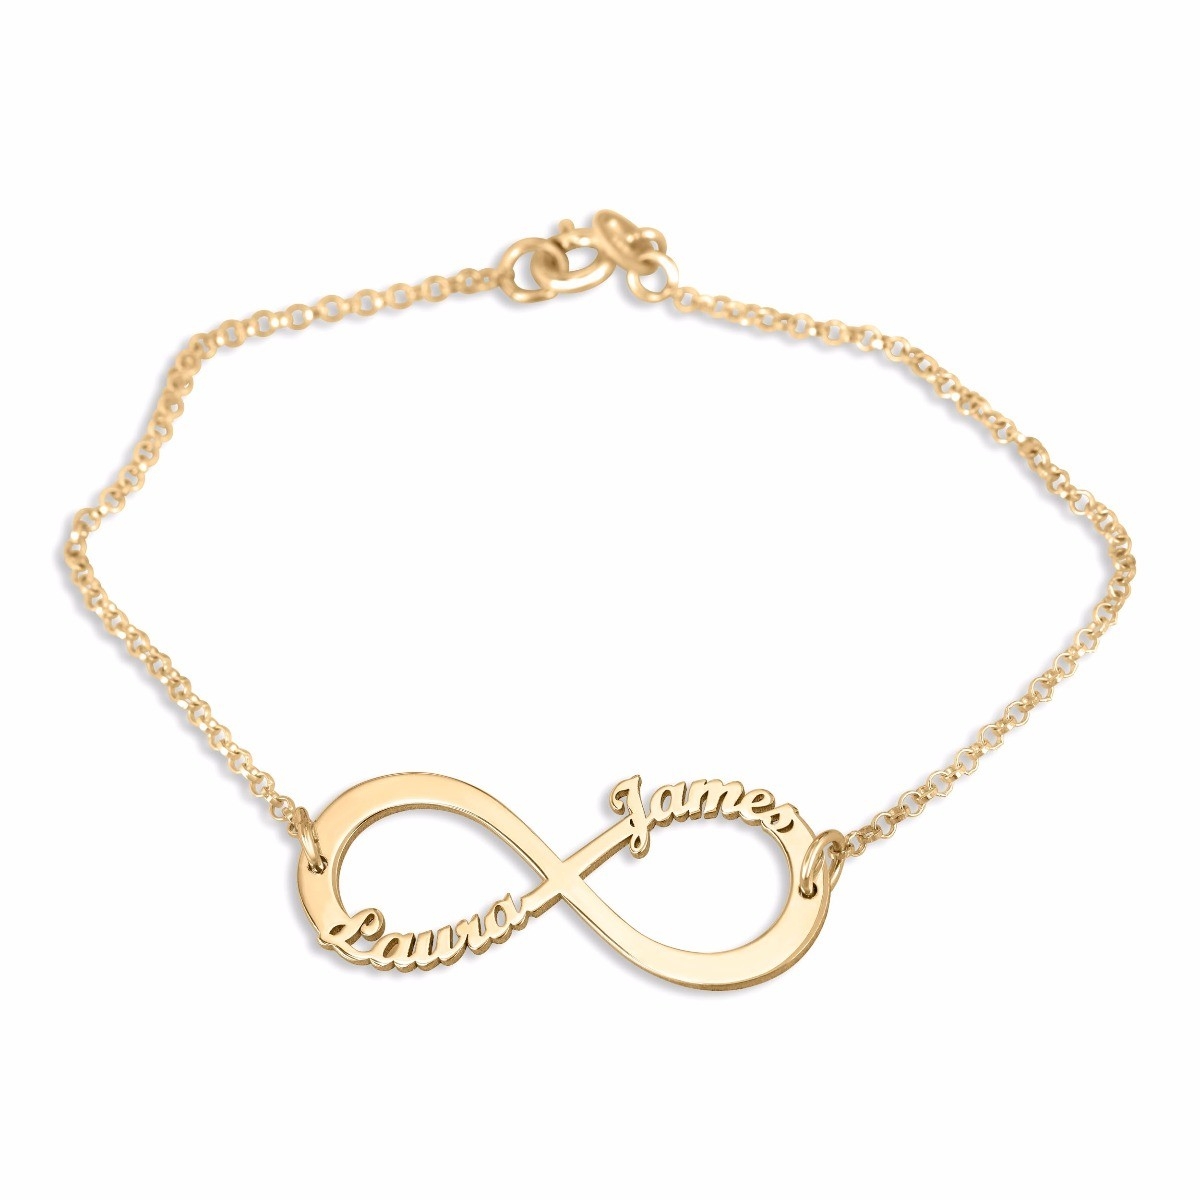 10K Gold Name Bracelet with Double Heart